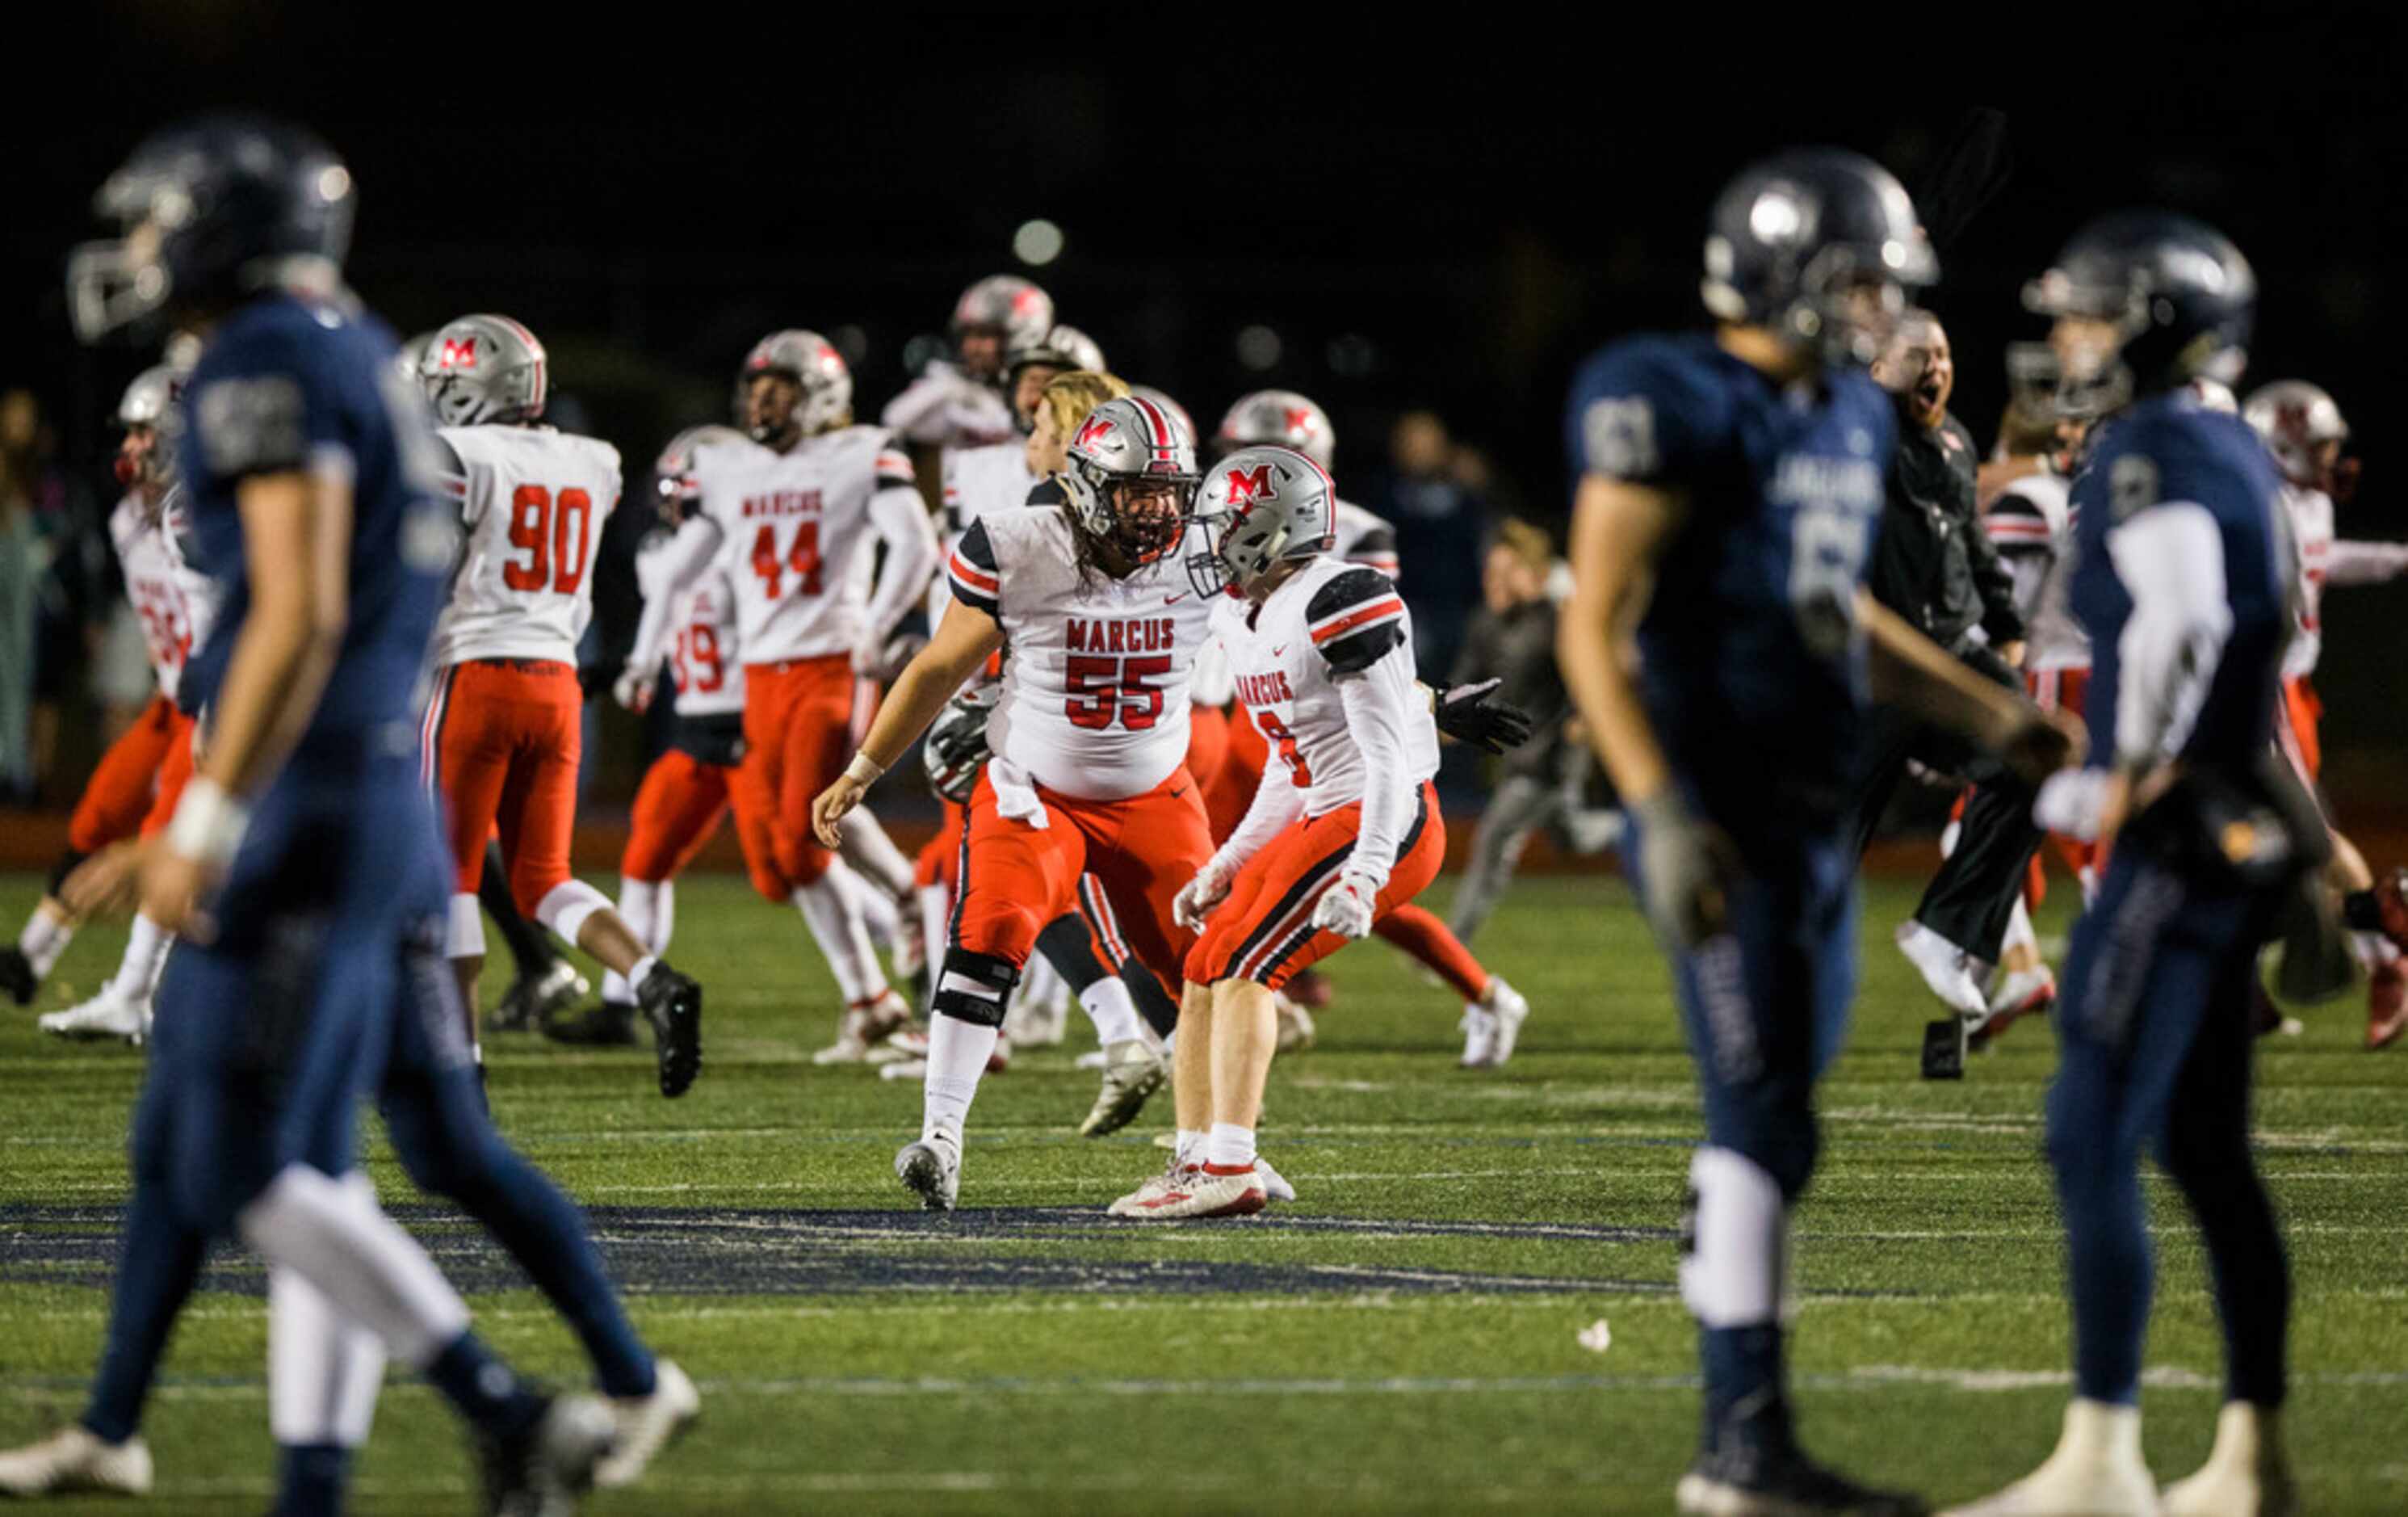 Flower Mound Marcus celebrates a 34-31 win over Flower Mound on Friday, October 25, 2019 at...